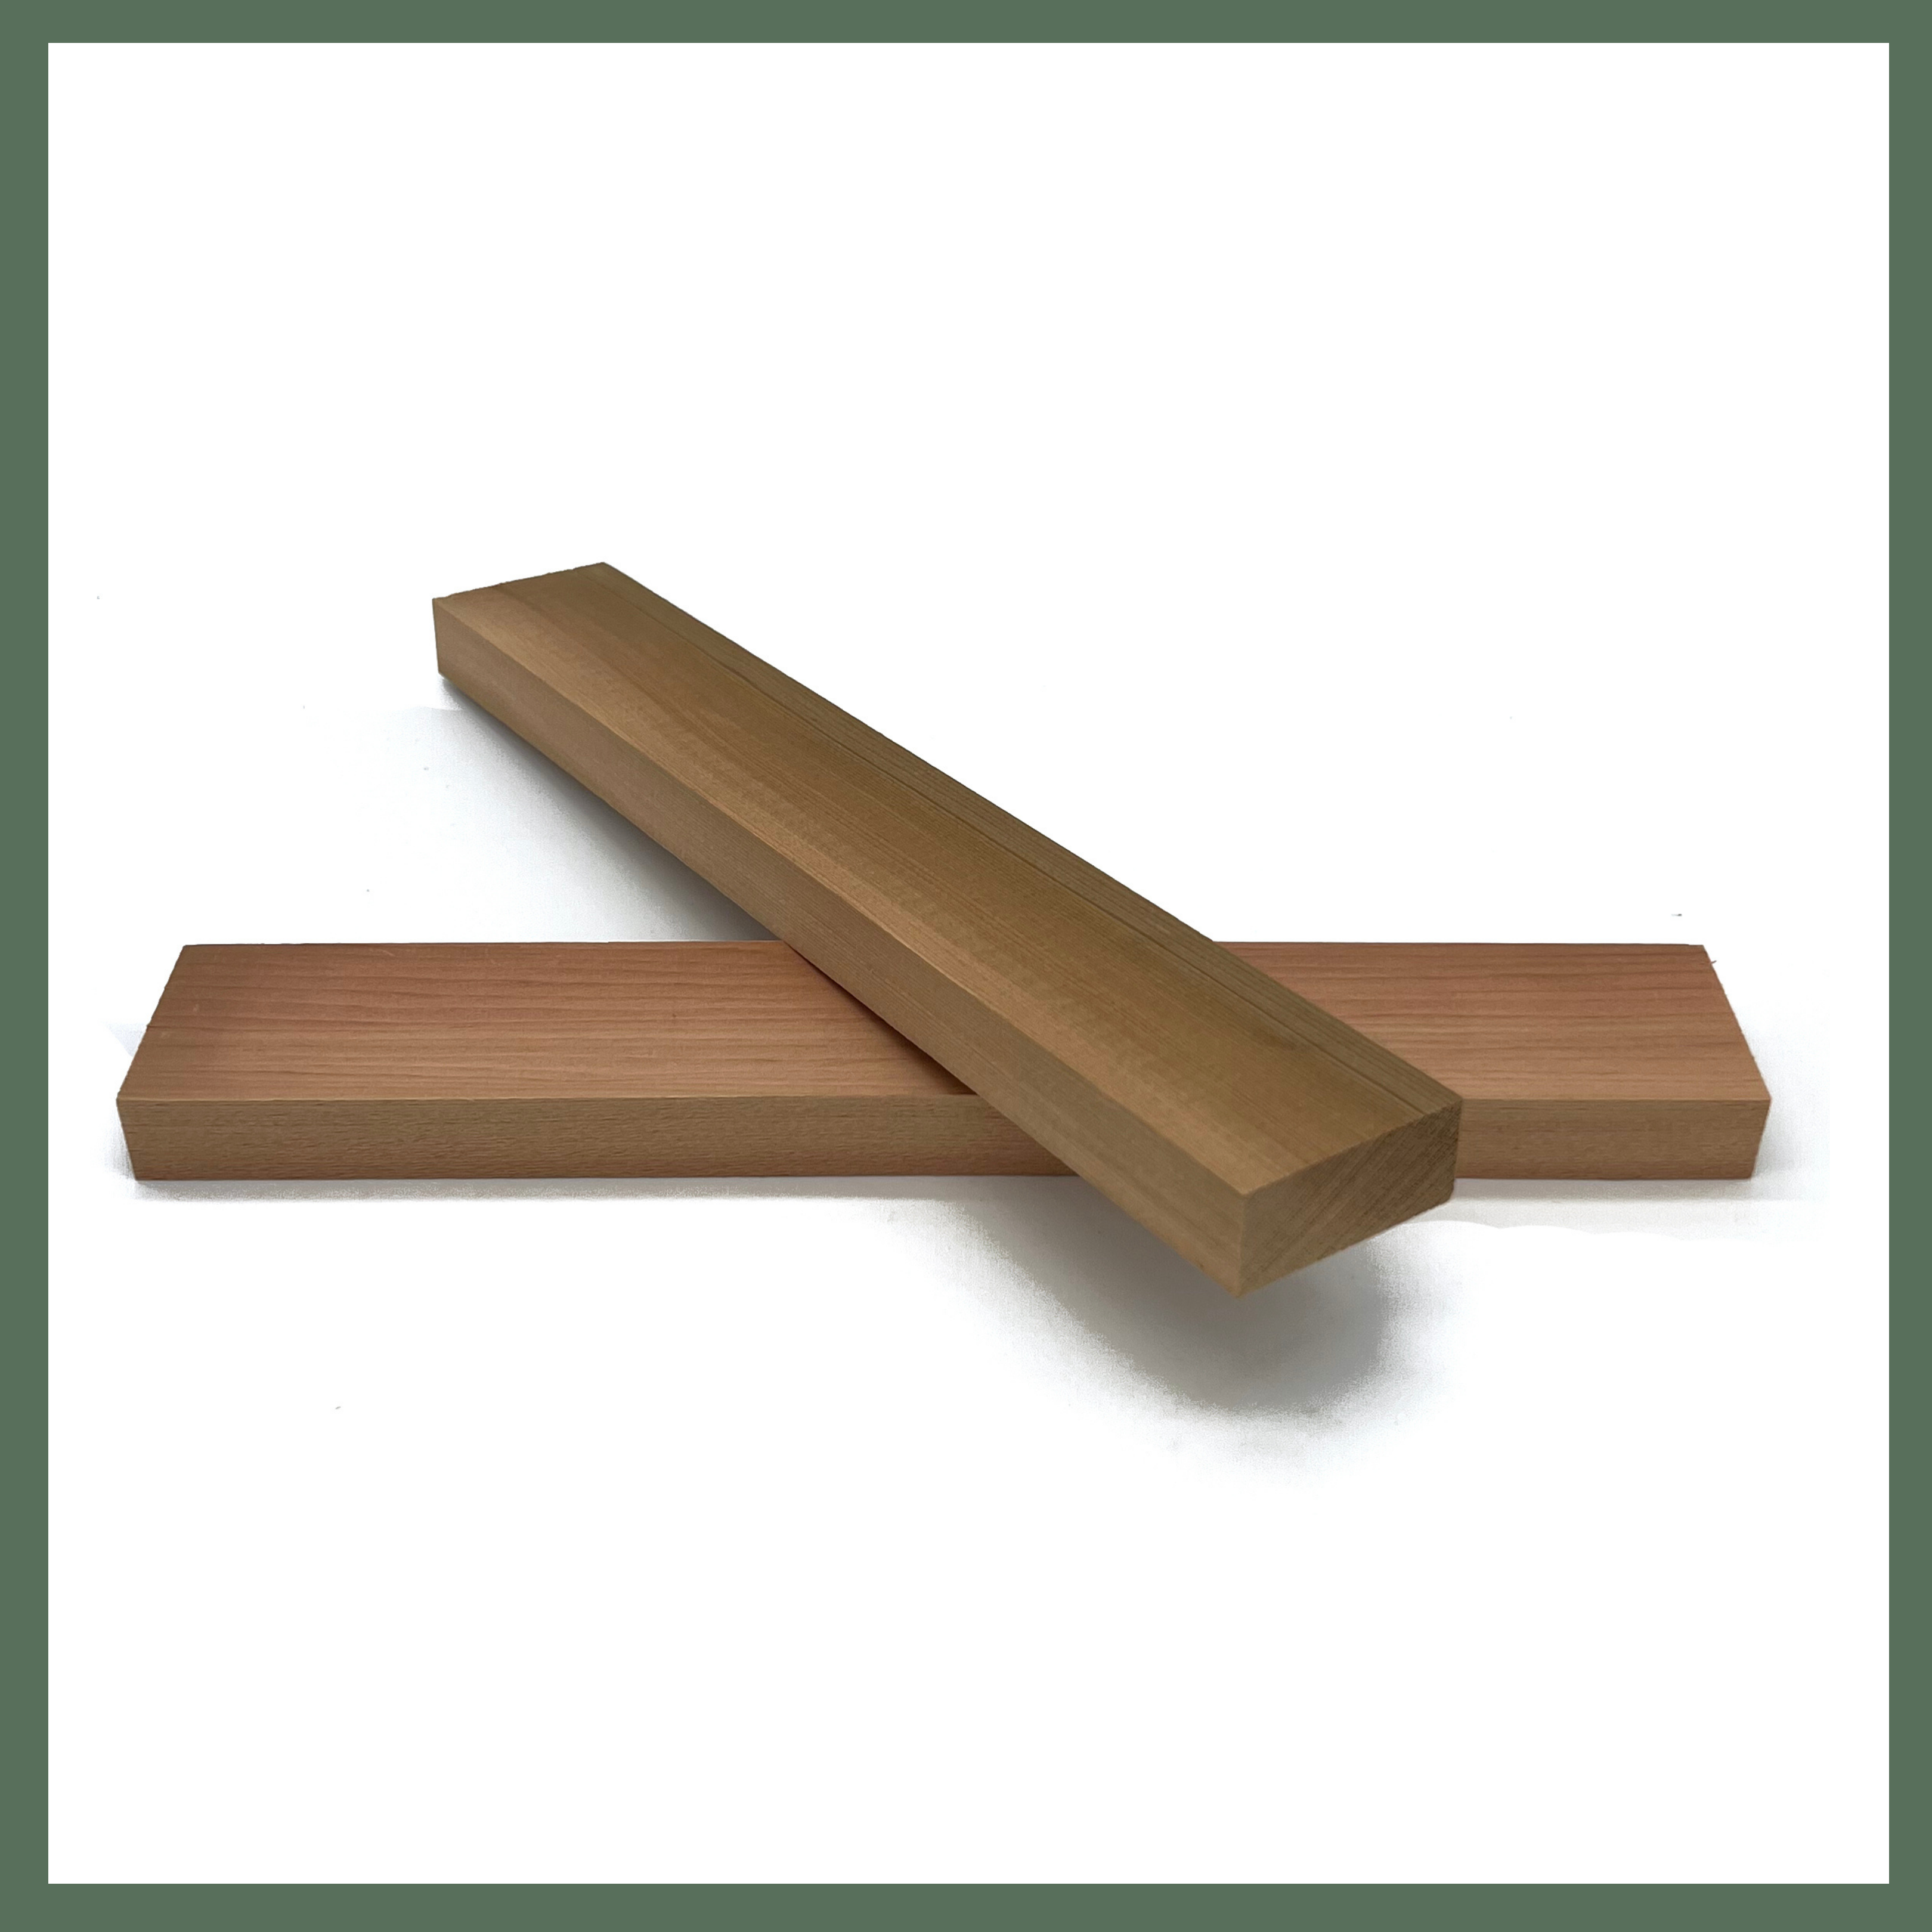 Buy Canadian Western Red Cedar No.2 Clear & Better T&G Cladding 16 / Planned All Round – J F Timber